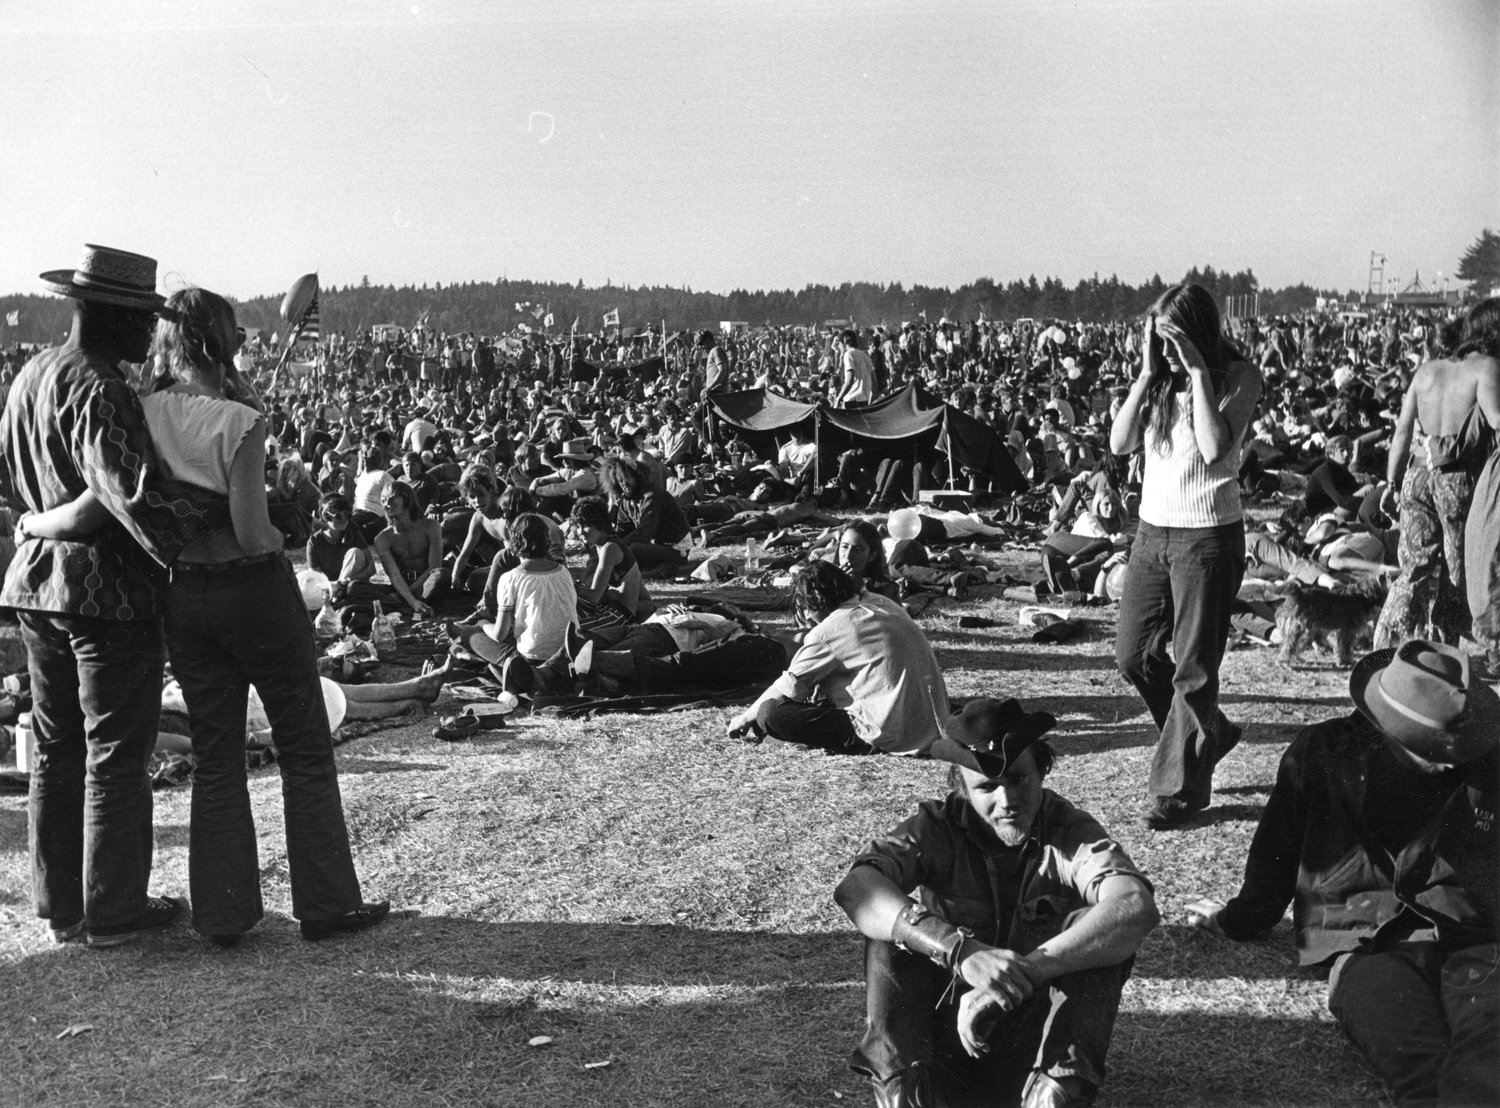 The Tenino Sky River Rock Festival and Lighter Than Air Fair took place on Labor Day weekend in 1969.